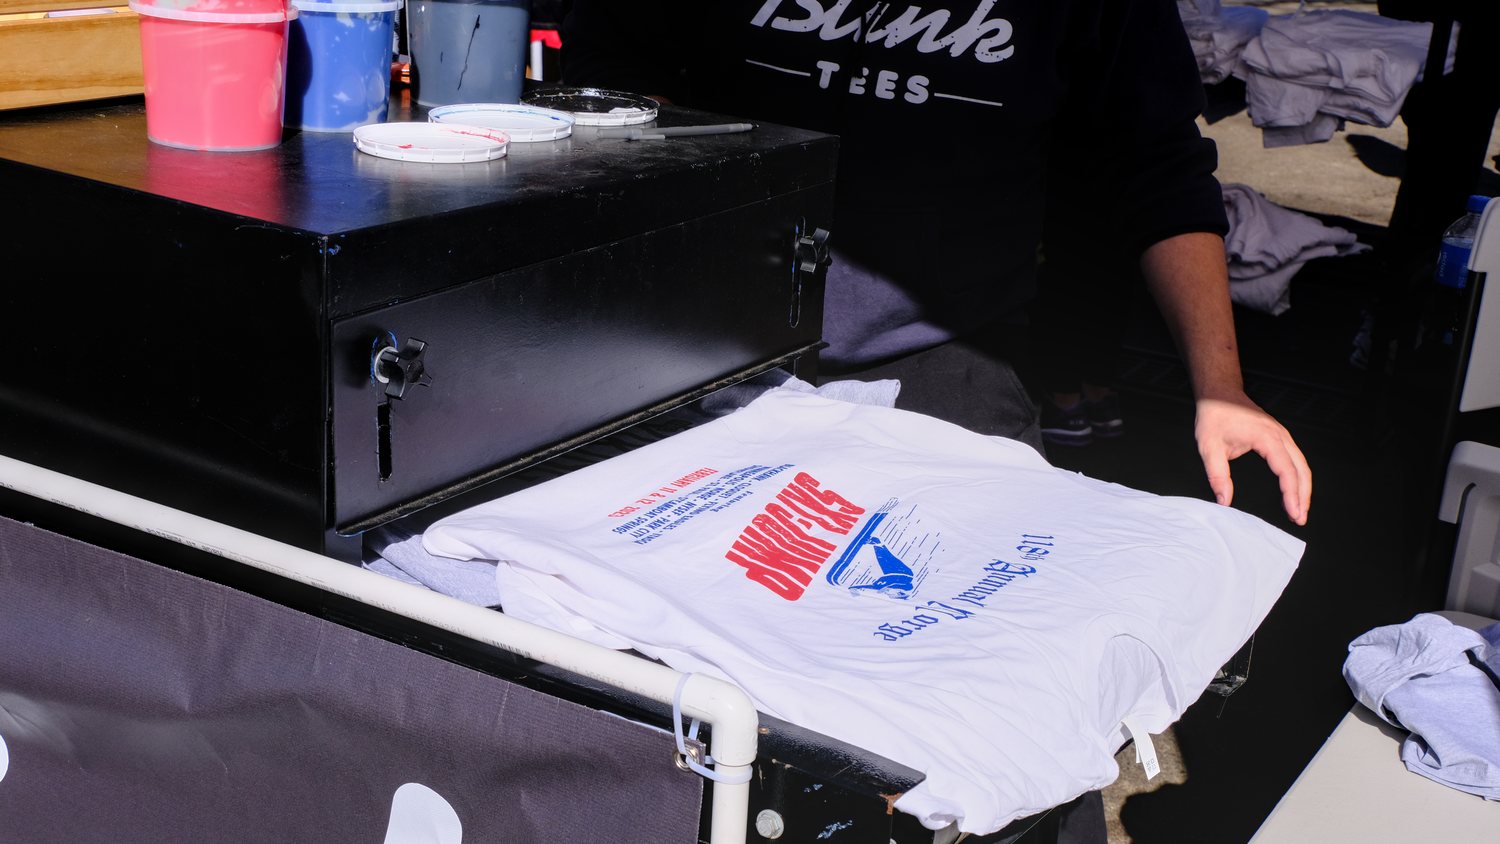 Blink Tees printing T-shirts at the 118th Annual Norge Ski Club Winter Tournament.